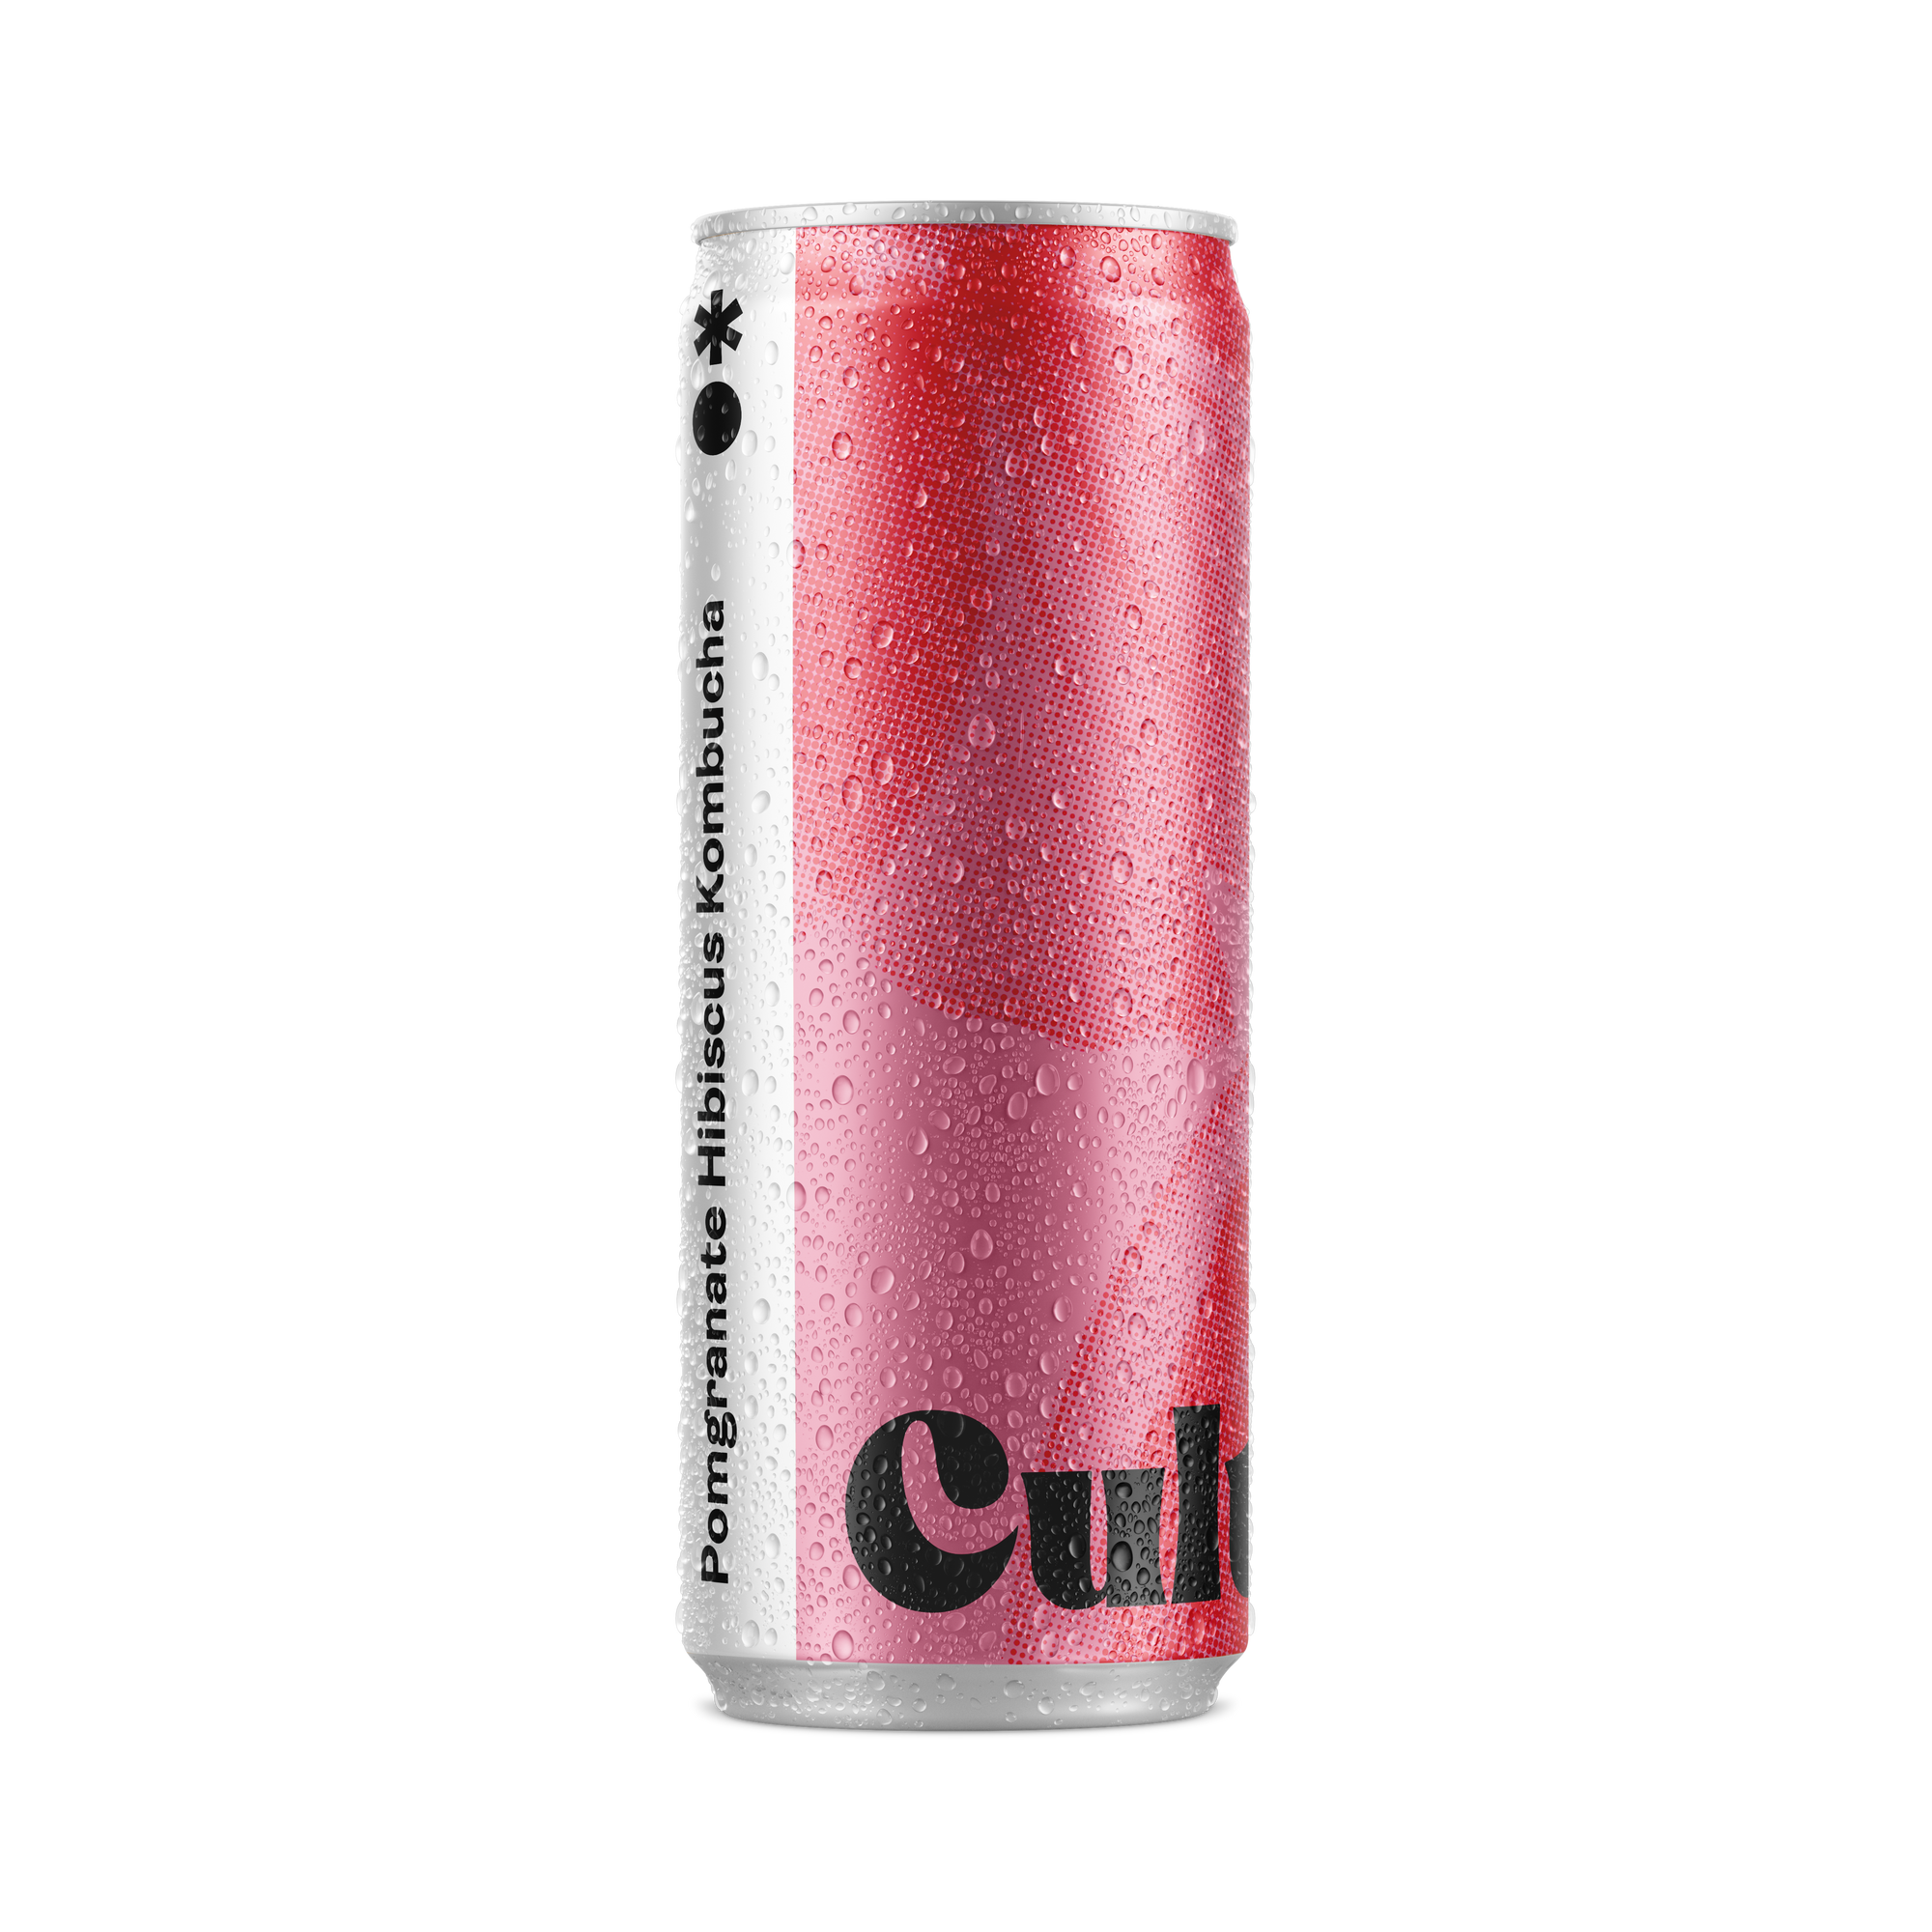 Pomegranate Hibiscus (24 Can Pack)